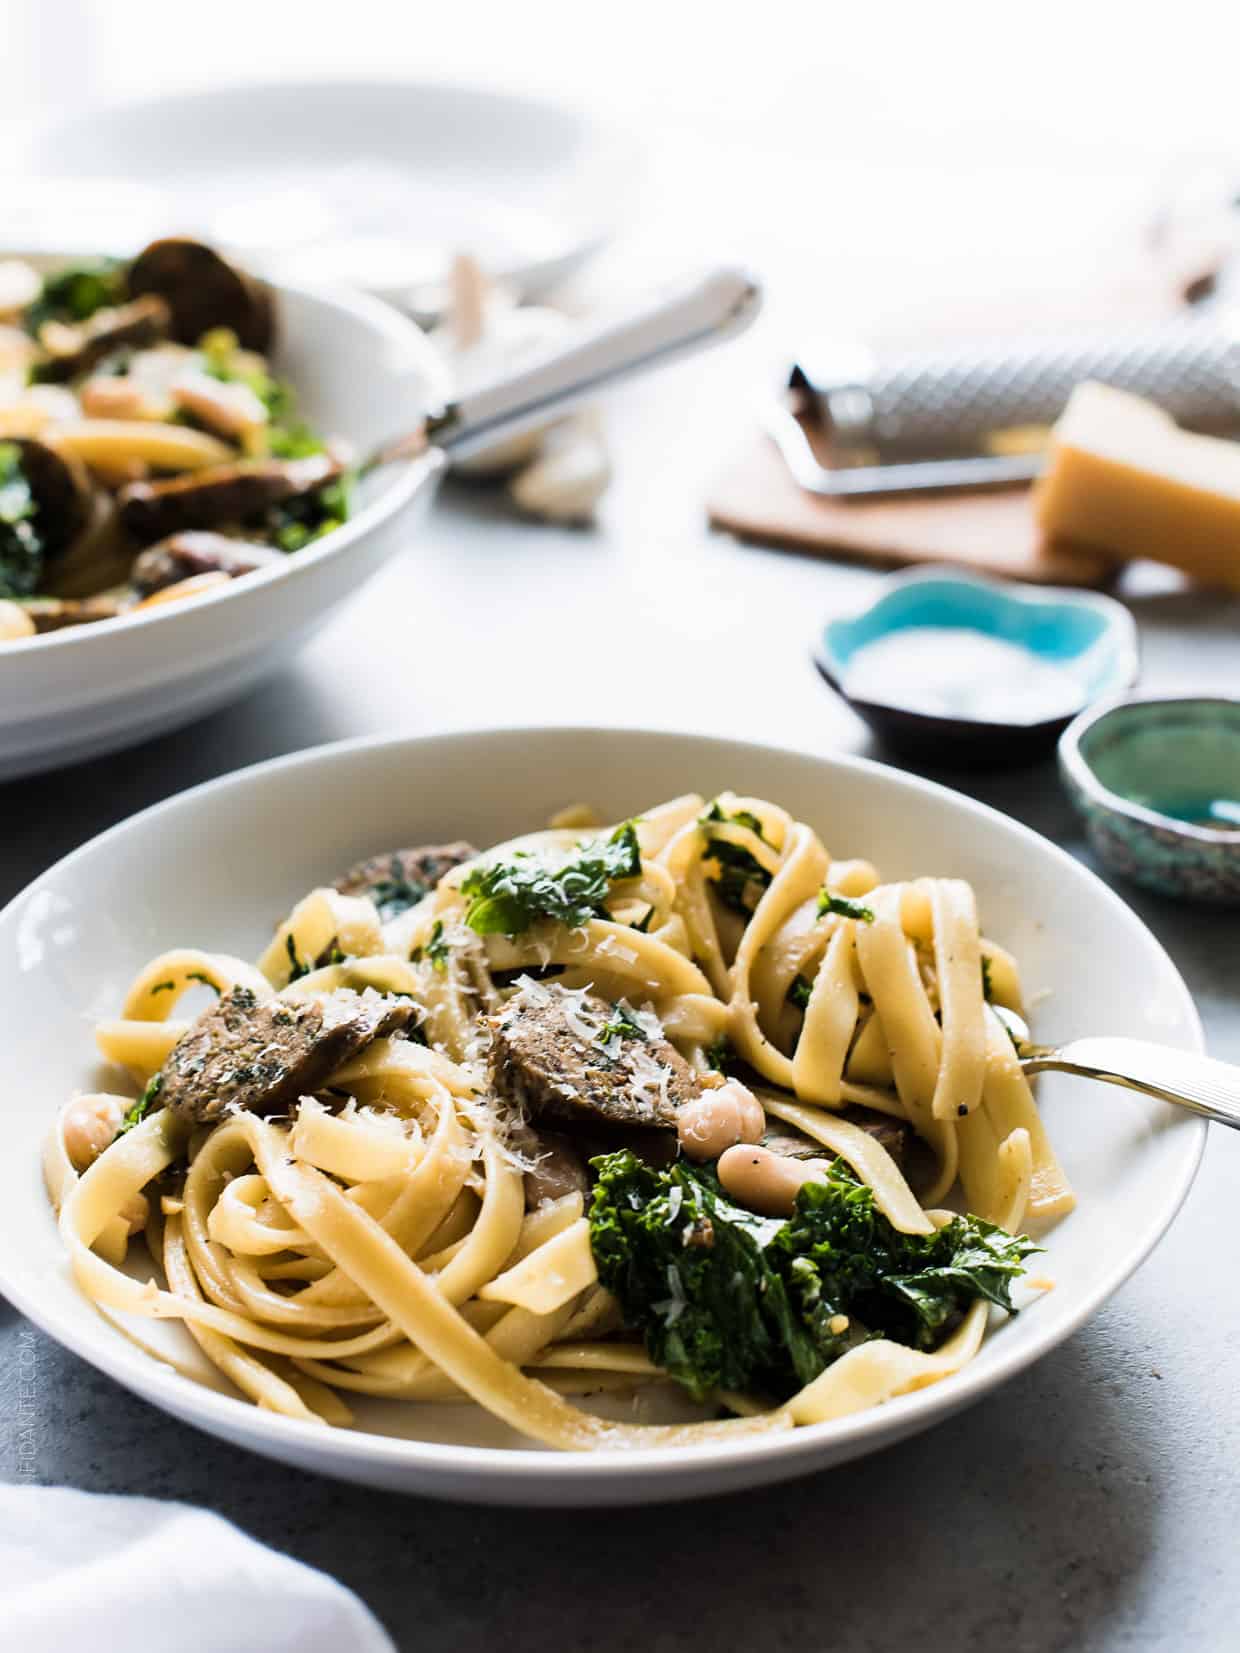 Fettuccine with Chicken Sausage, Kale and Cannellini Beans in a white bowl with the pasta twirled around a fork.